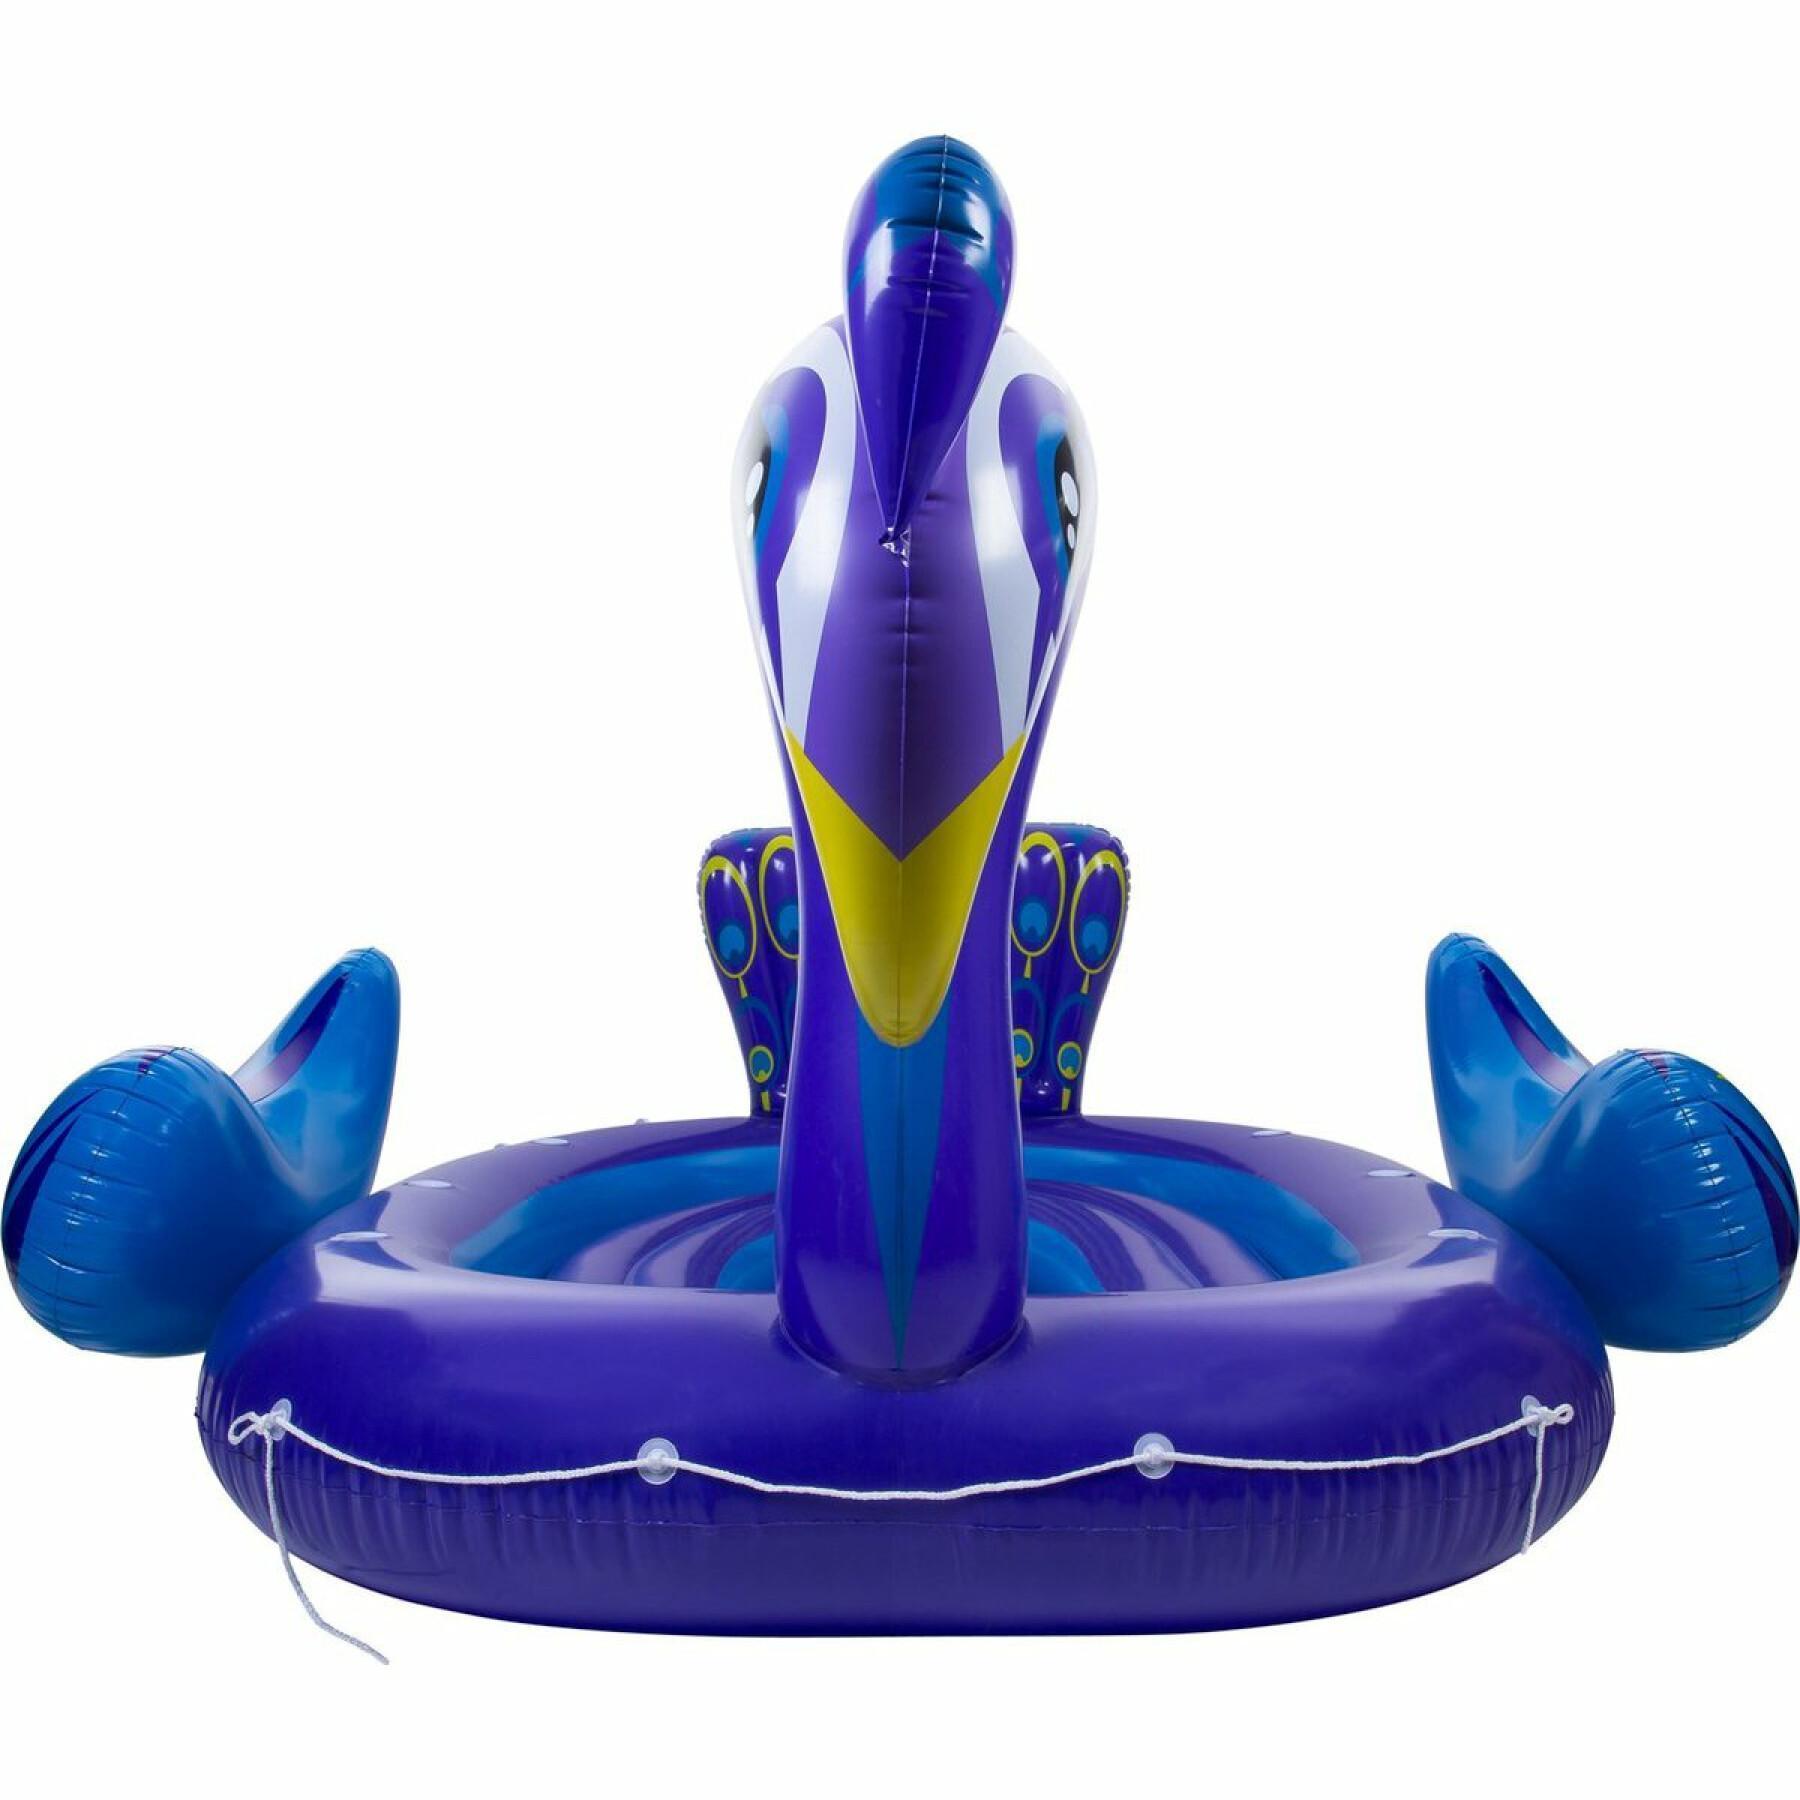 Barco inflable el Pure4Fun Paon